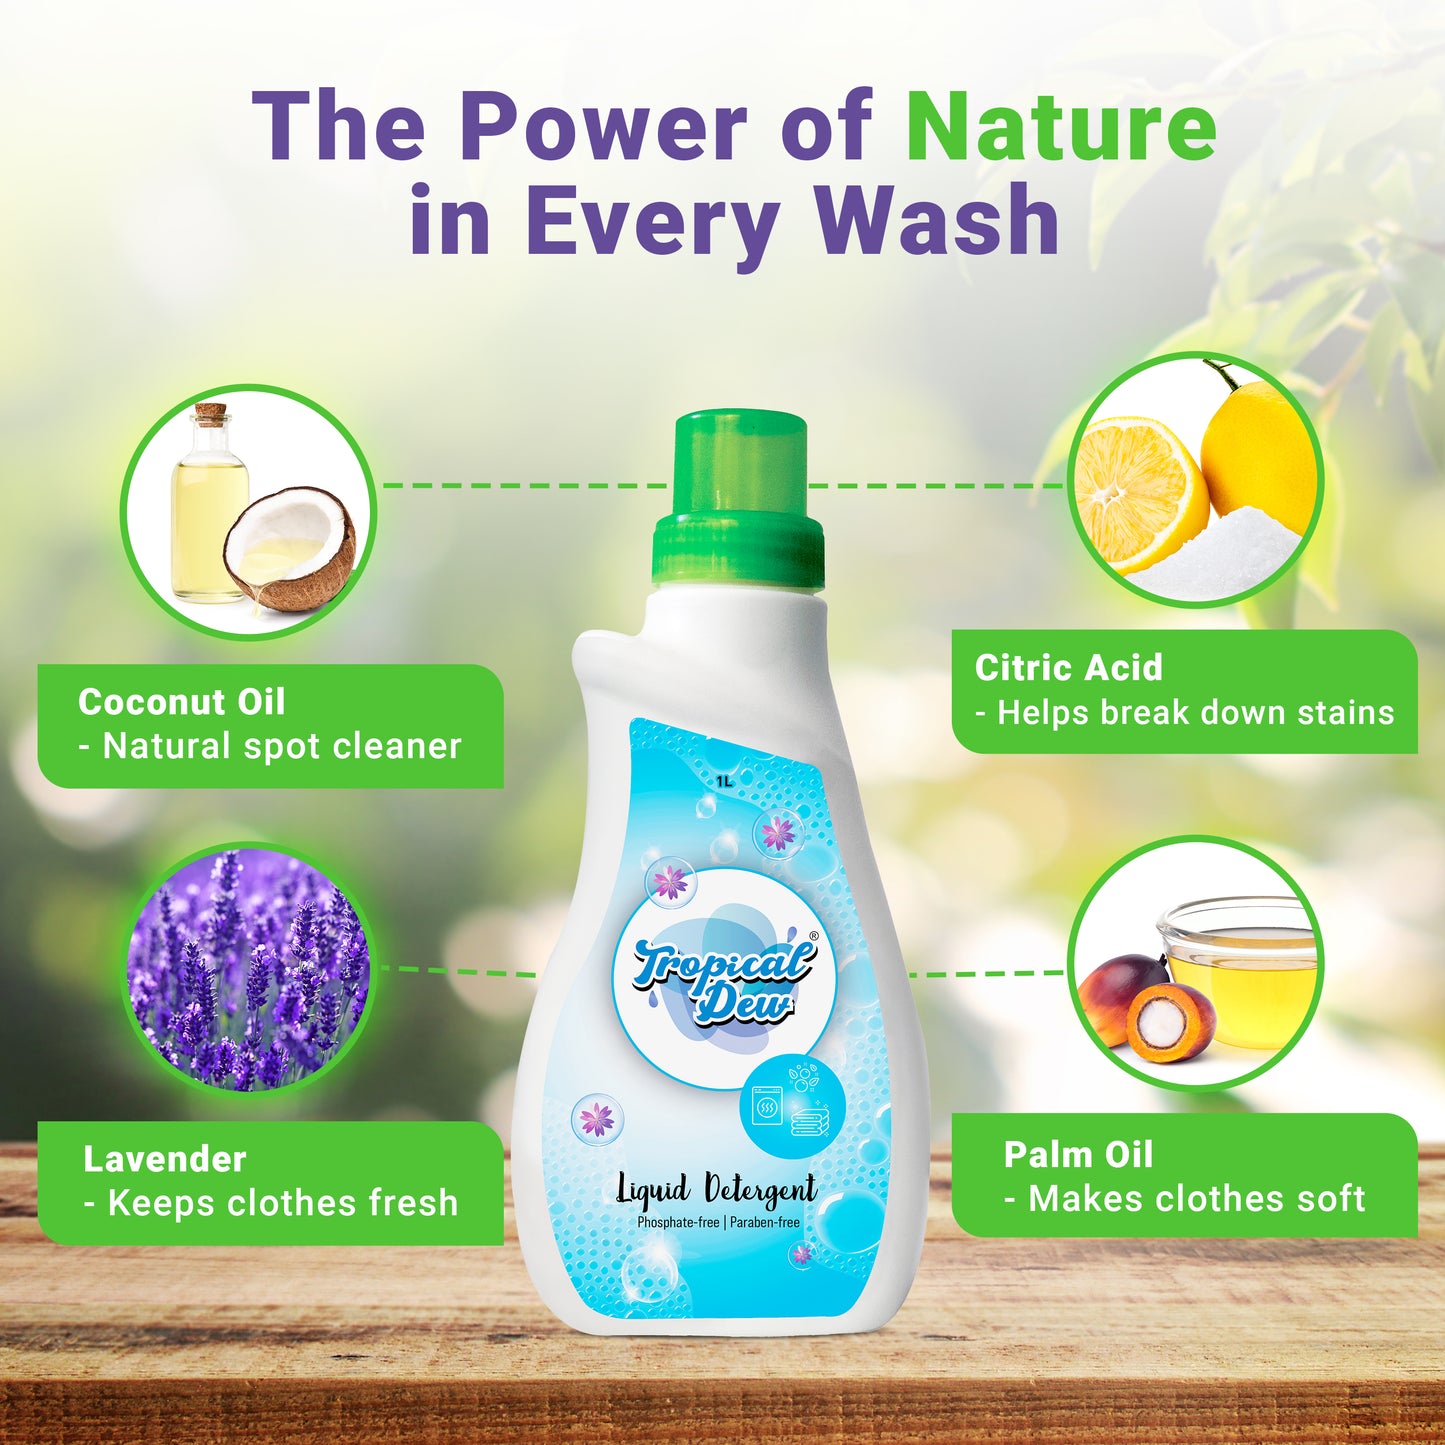 Laundry Soap Liquid Detergent - Phosphate & Paraben Free Natural Detergent with Citric Acid for Stain Removal - For Hand Wash, Front Load & Top Load Washing Machine - Tropical Dew, Lavender Scent, 1L